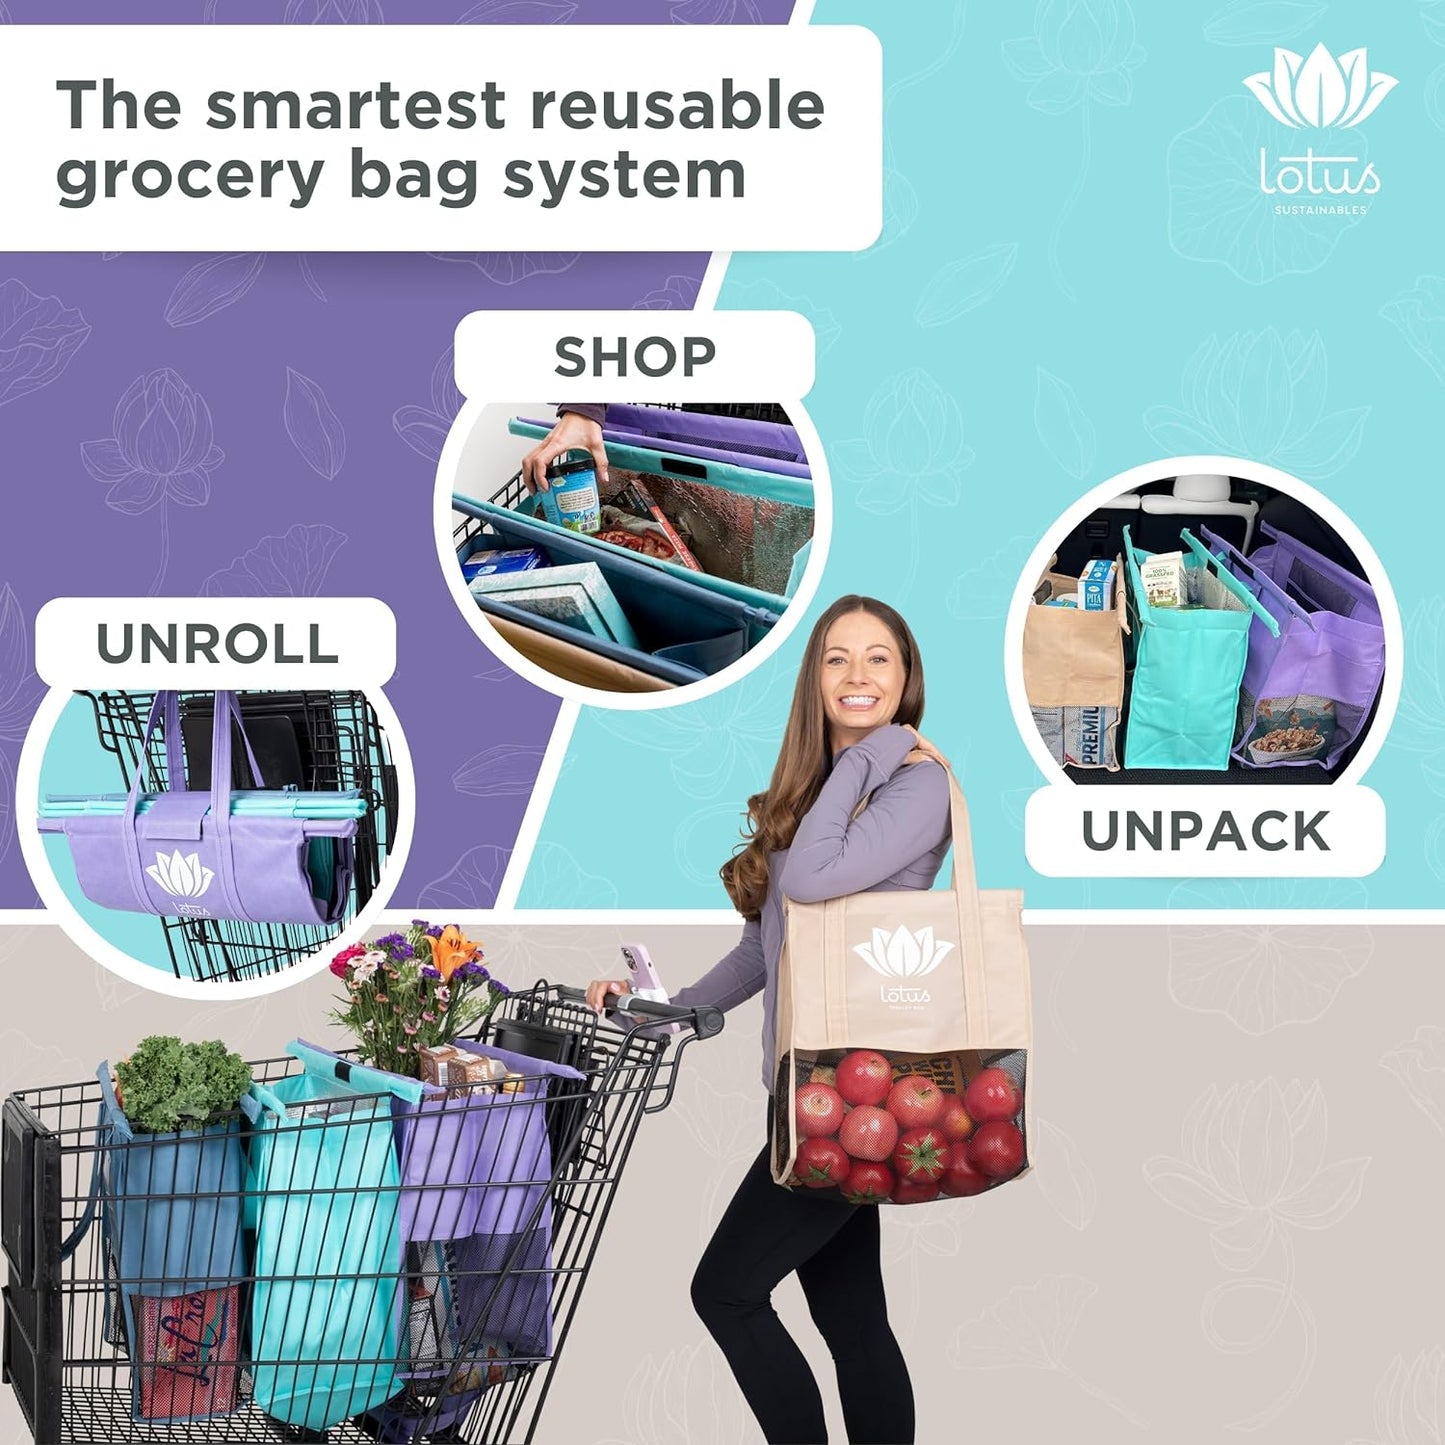 Grocery Store Reusable Easy Cart and Pack Set of 4 -W/Lrg COOLER Bag & Egg/Wine Holder! Reusable Grocery Cart Bags Sized for USA. Washable Eco-Friendly 4-Bag Grocery Tote. 